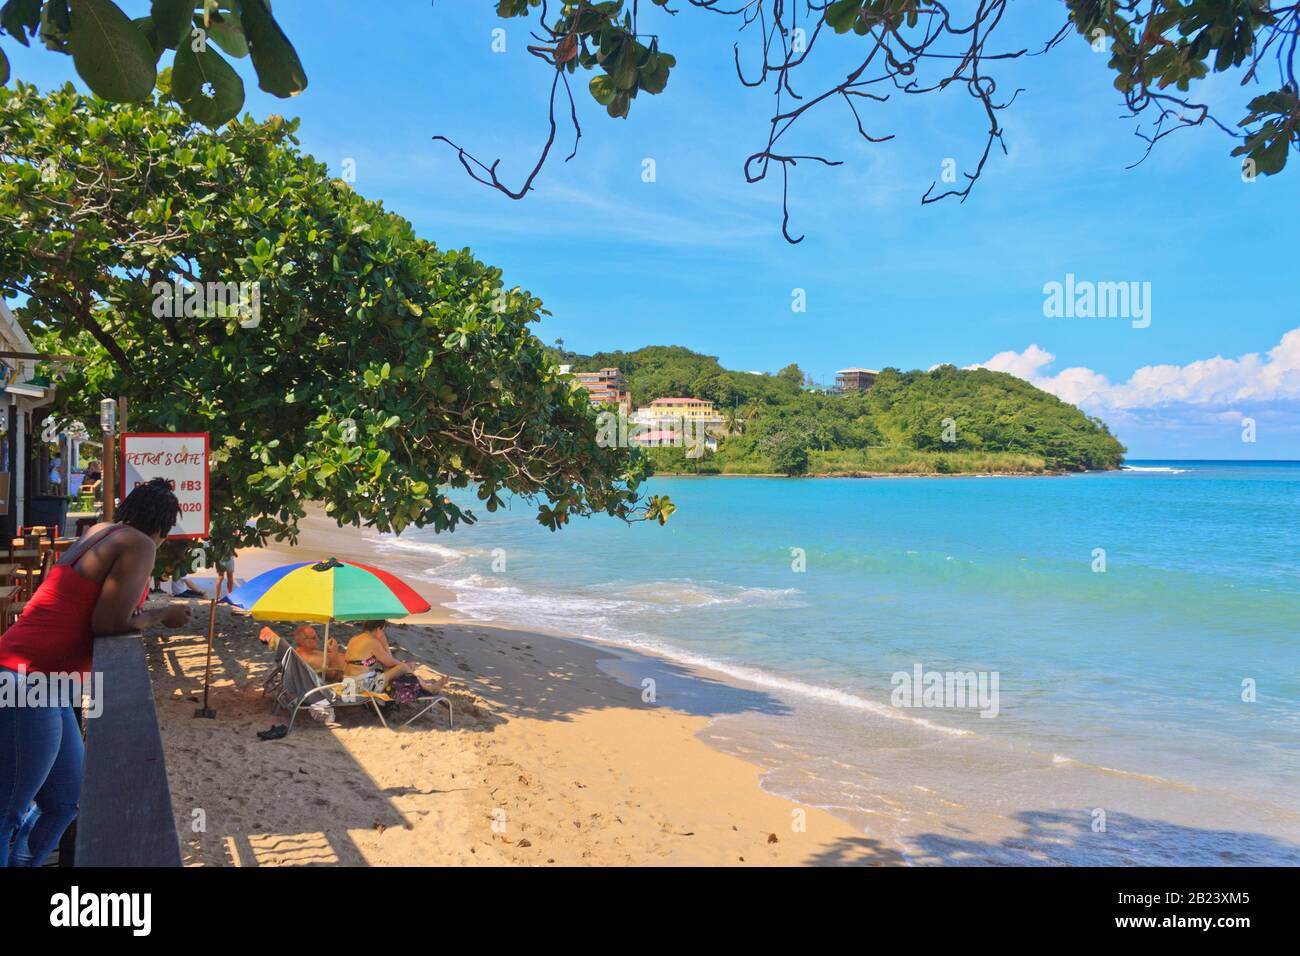 Castries, Saint Lucia - November 23, 2019. Beautiful day at Vigie tourists under multicolored beach umbrellas, local lady standing looking at them Stock Photo